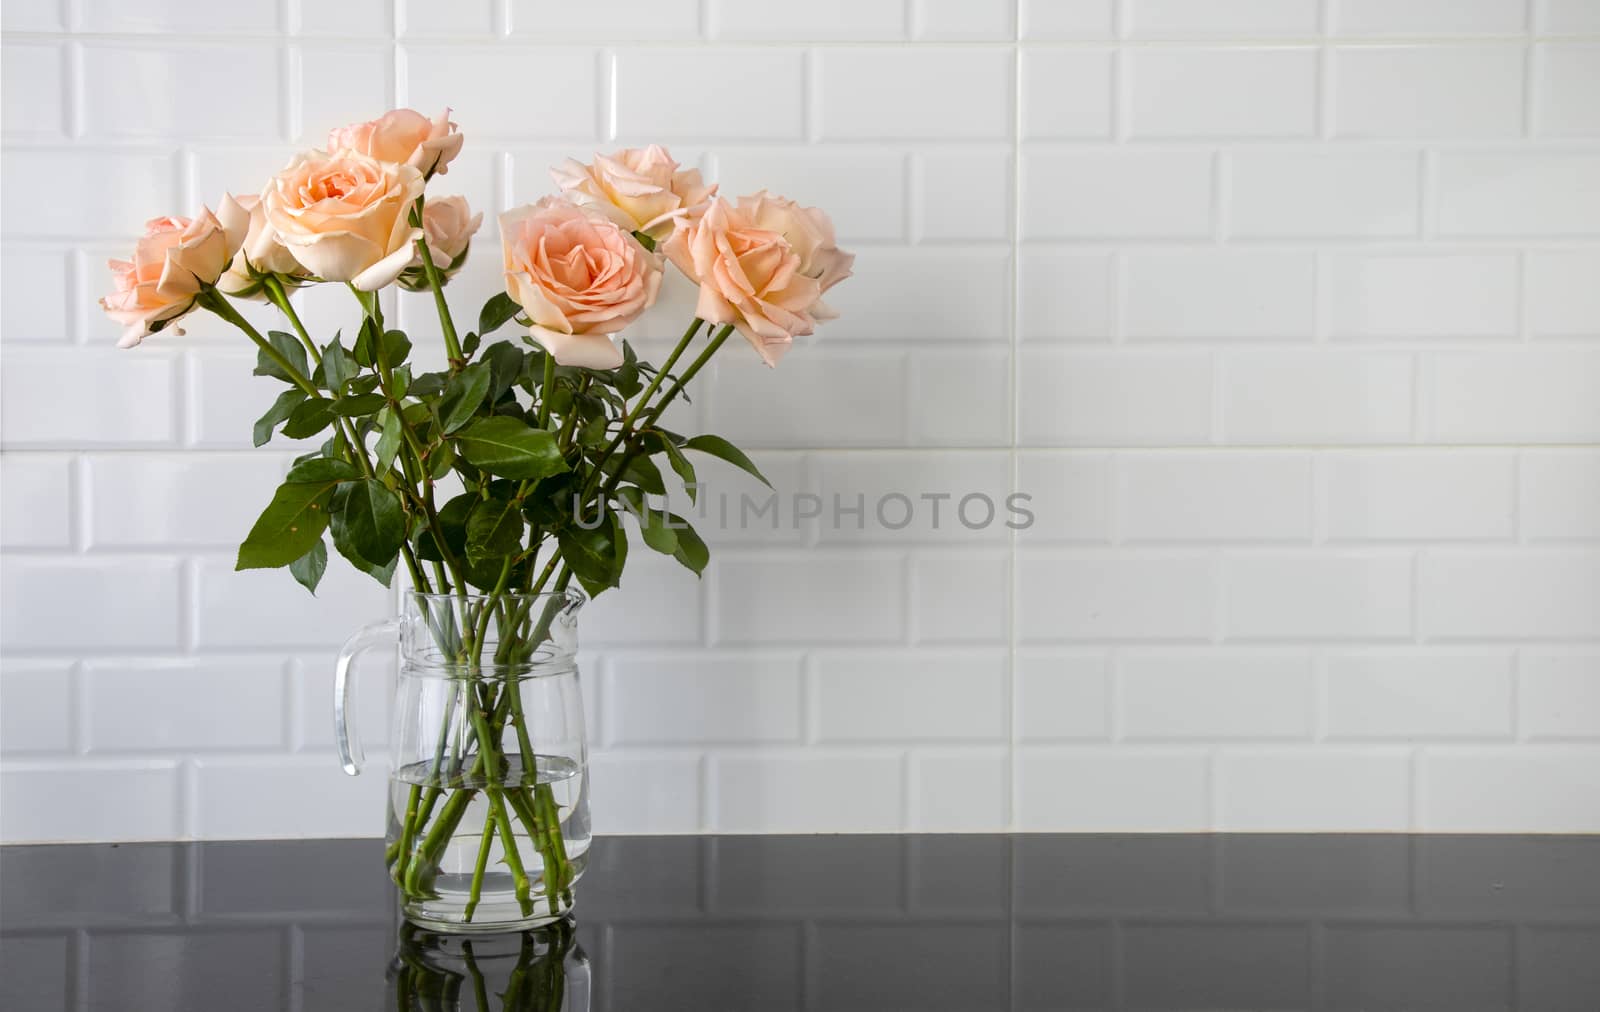 Beautiful peach color roses in a glass jug on black granite kitchen counter and white tile background.